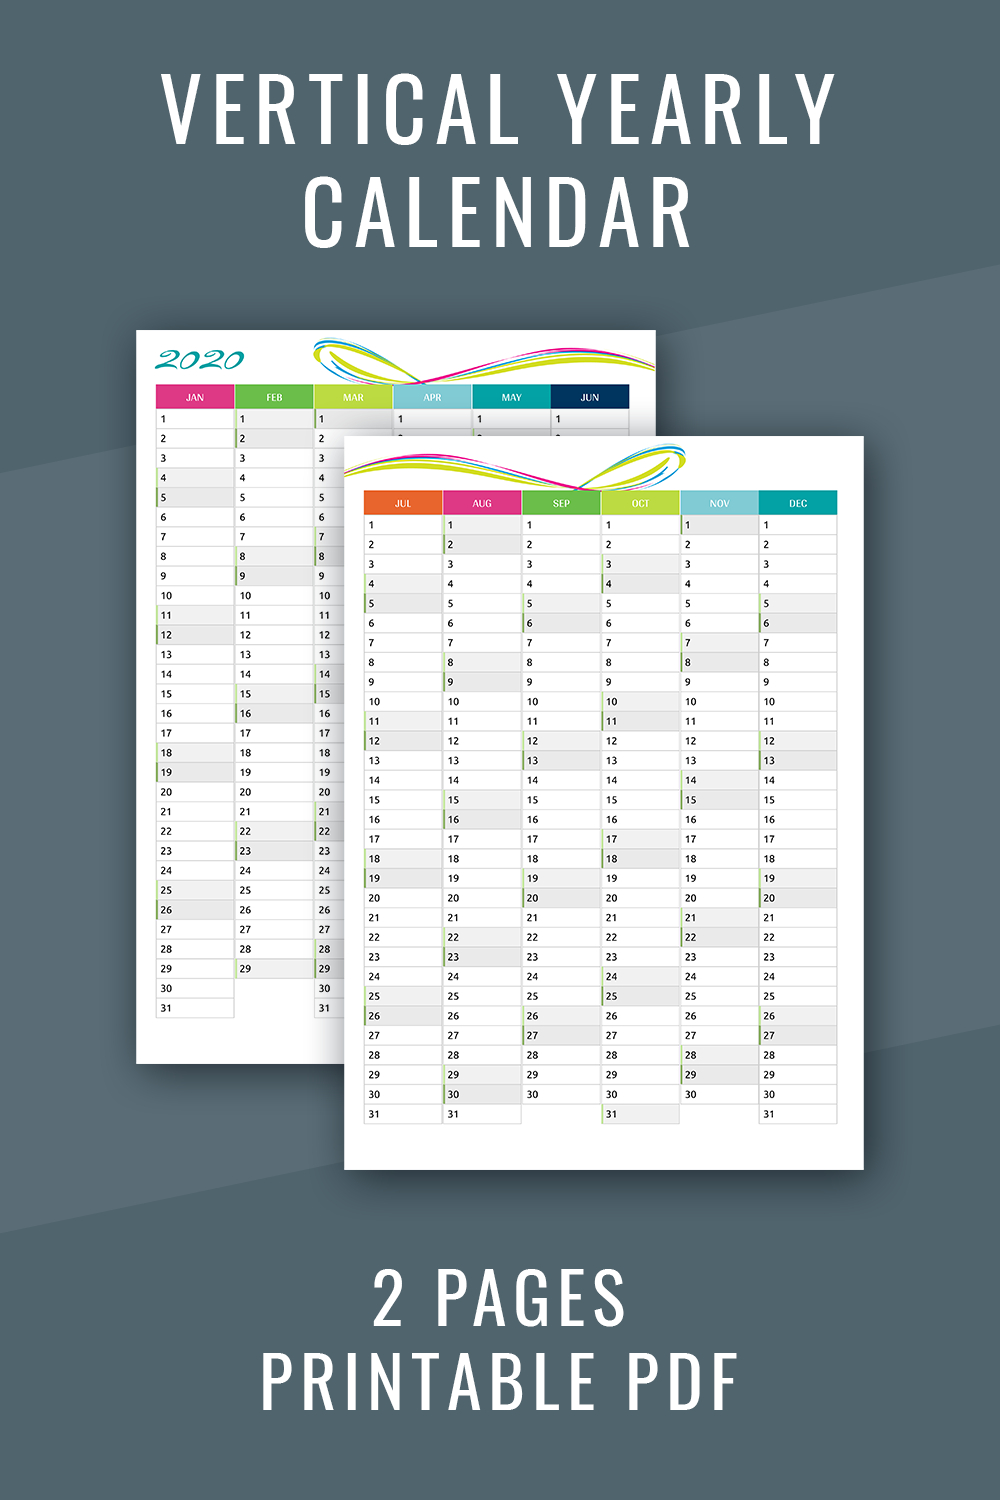 Vertical Yearly Calendar 2019-2020 | Year On Two Pages